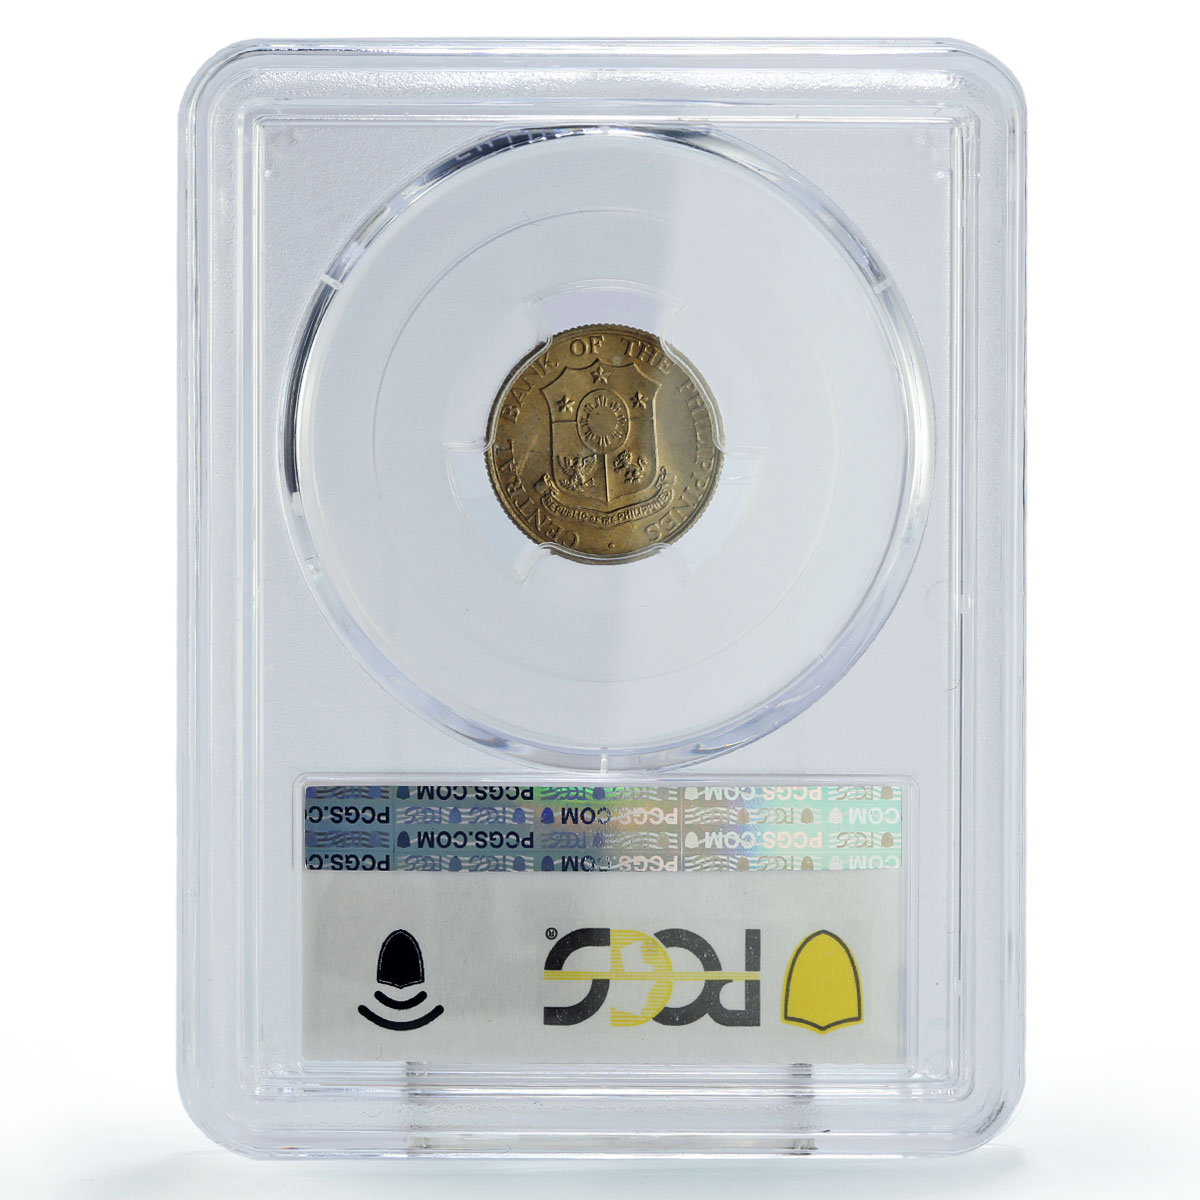 Philippines 10 centavos Regular Coinage Liberty KM-188 MS66 PCGS CuNi coin 1964